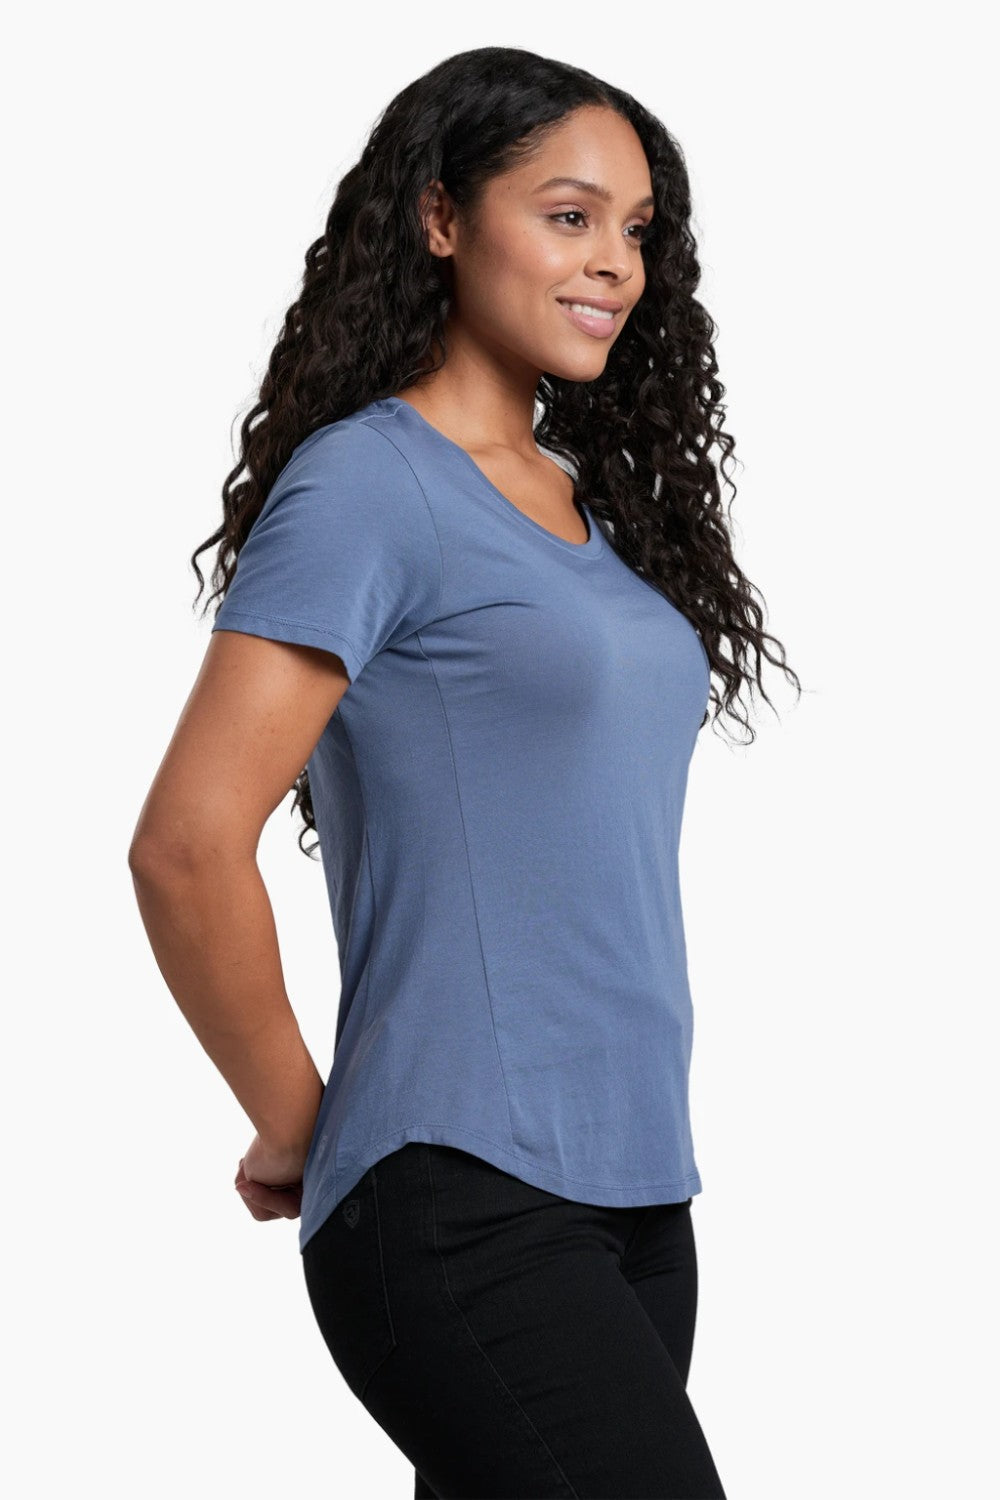 The ARABELLA™ SCOOP Short Sleeve is the perfect remedy for warm summer temperatures. Breathable 100% GOTS-certified organic cotton delivers ultra-soft, lightweight comfort when you need it most. A stylish scoop neckline and curved bottom hem elevate the ARABELLA to the next level.